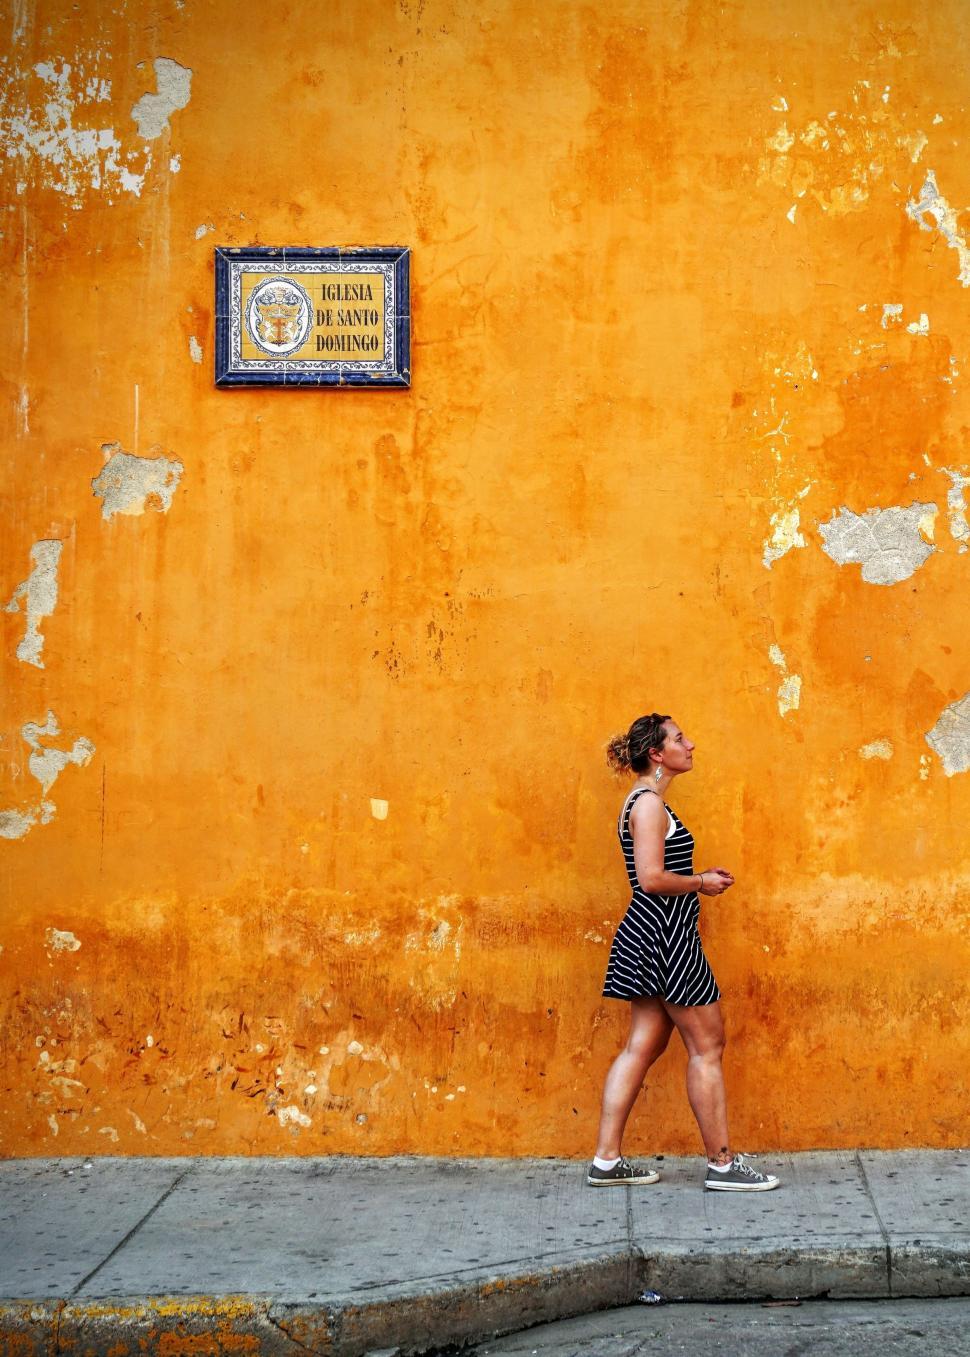 Free Image of Woman Walking Down the Street in Front of a Yellow Wall 